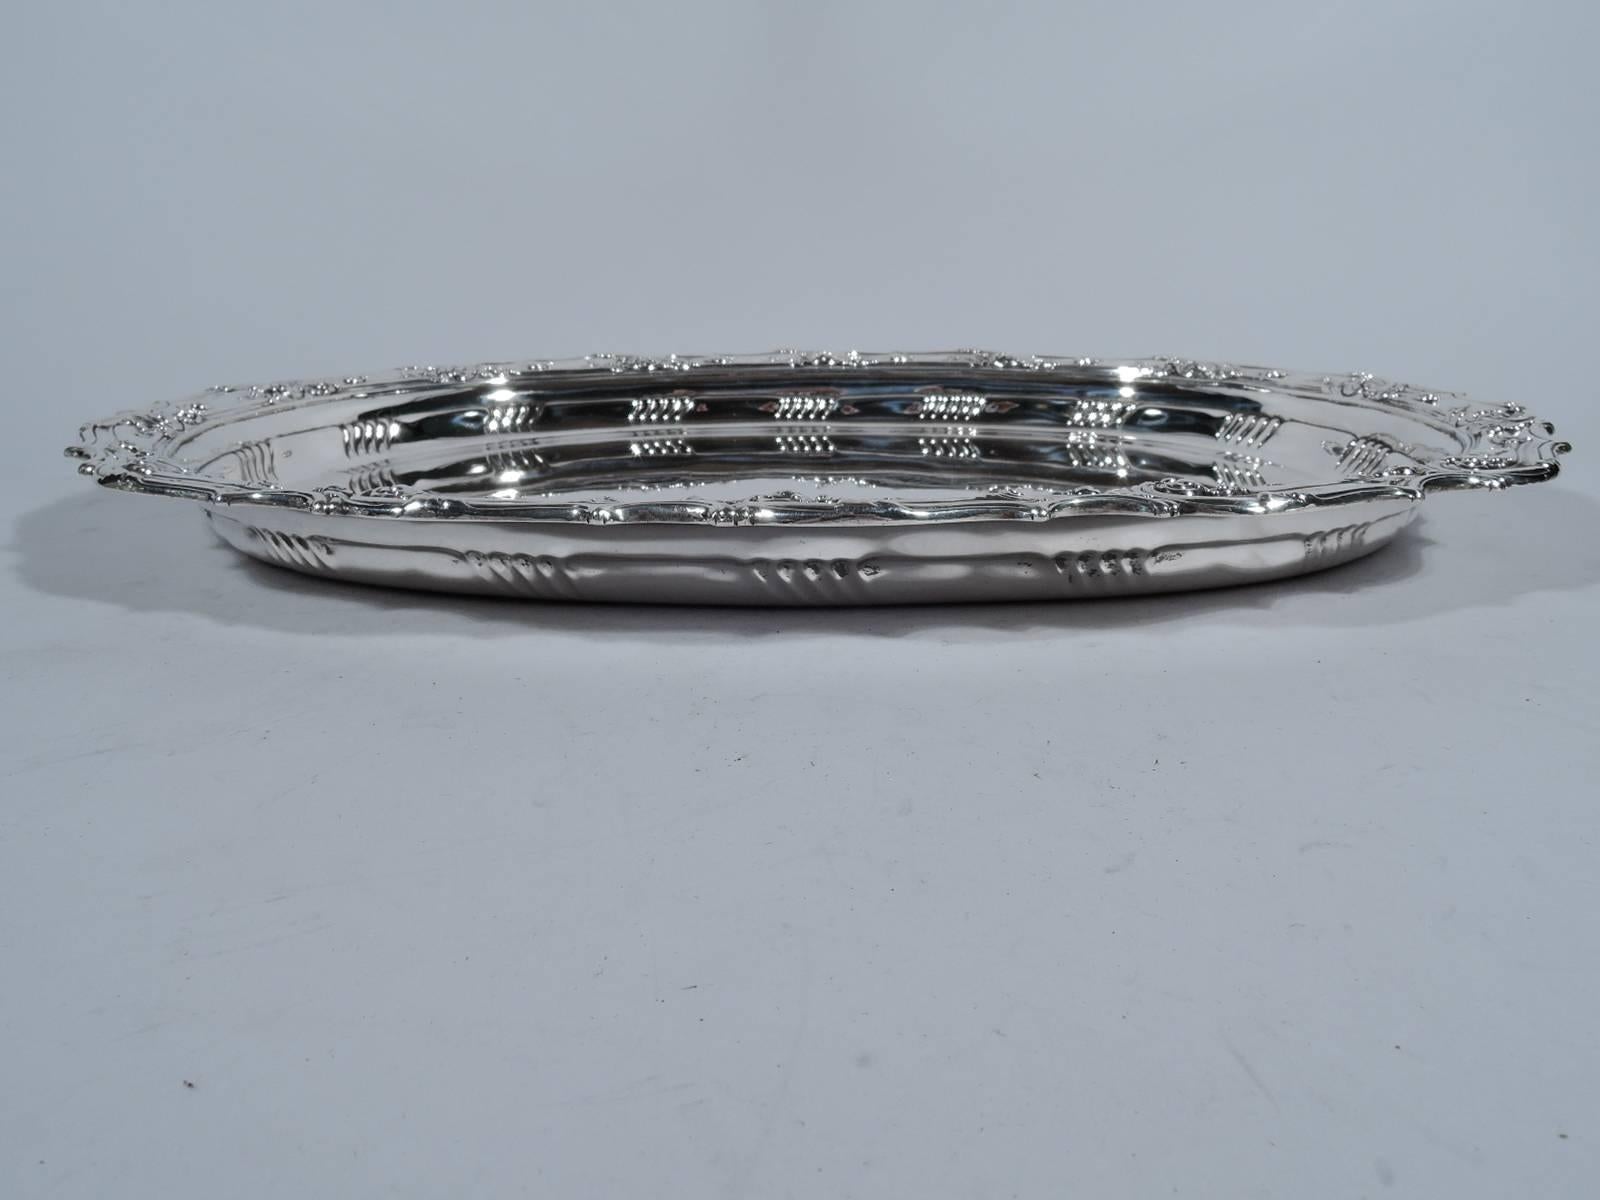 Antique sterling silver serving tray. Made by Tiffany & Co. in New York. Plain oval well tapering sides with slash lobing on interior, and everted rim with raised scrolls and flowers. Hallmark includes pattern no. 10617 and director’s letter T